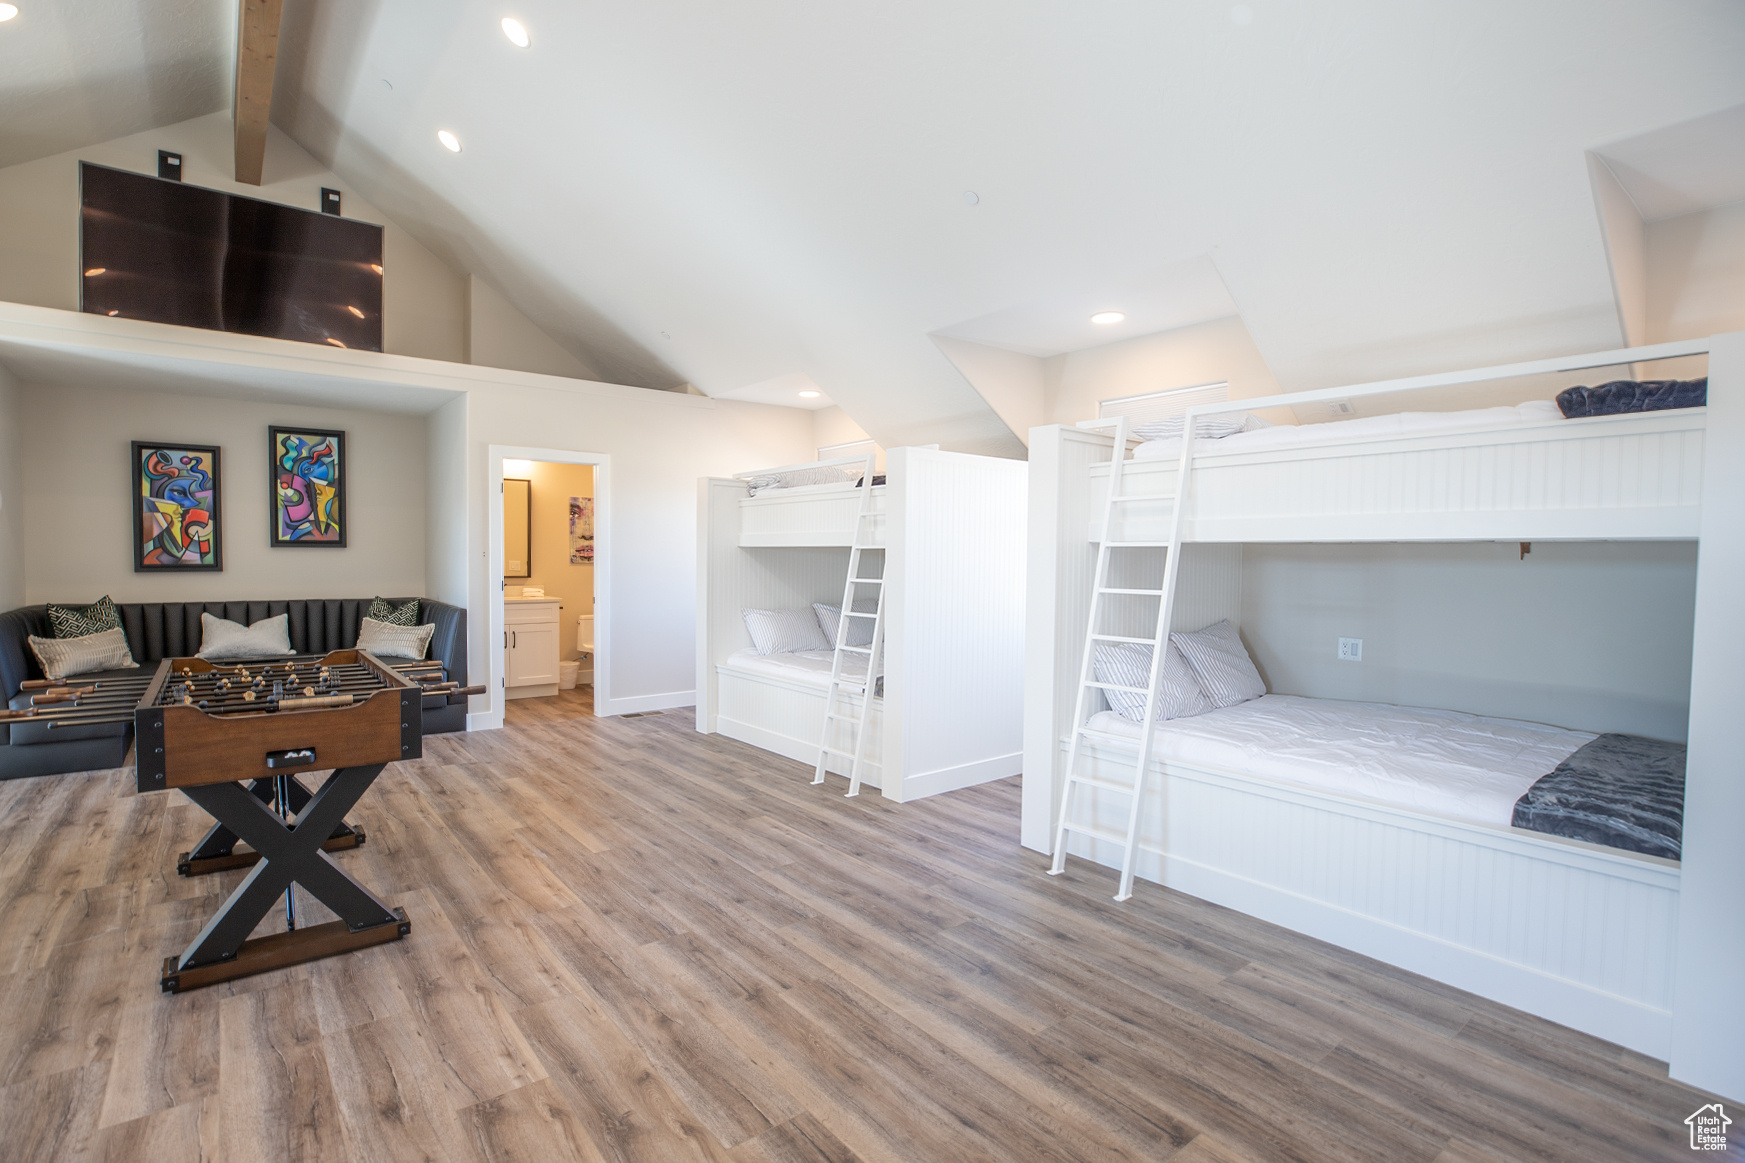 Bedroom with beam ceiling, light hardwood / wood-style flooring, connected bathroom, and high vaulted ceiling